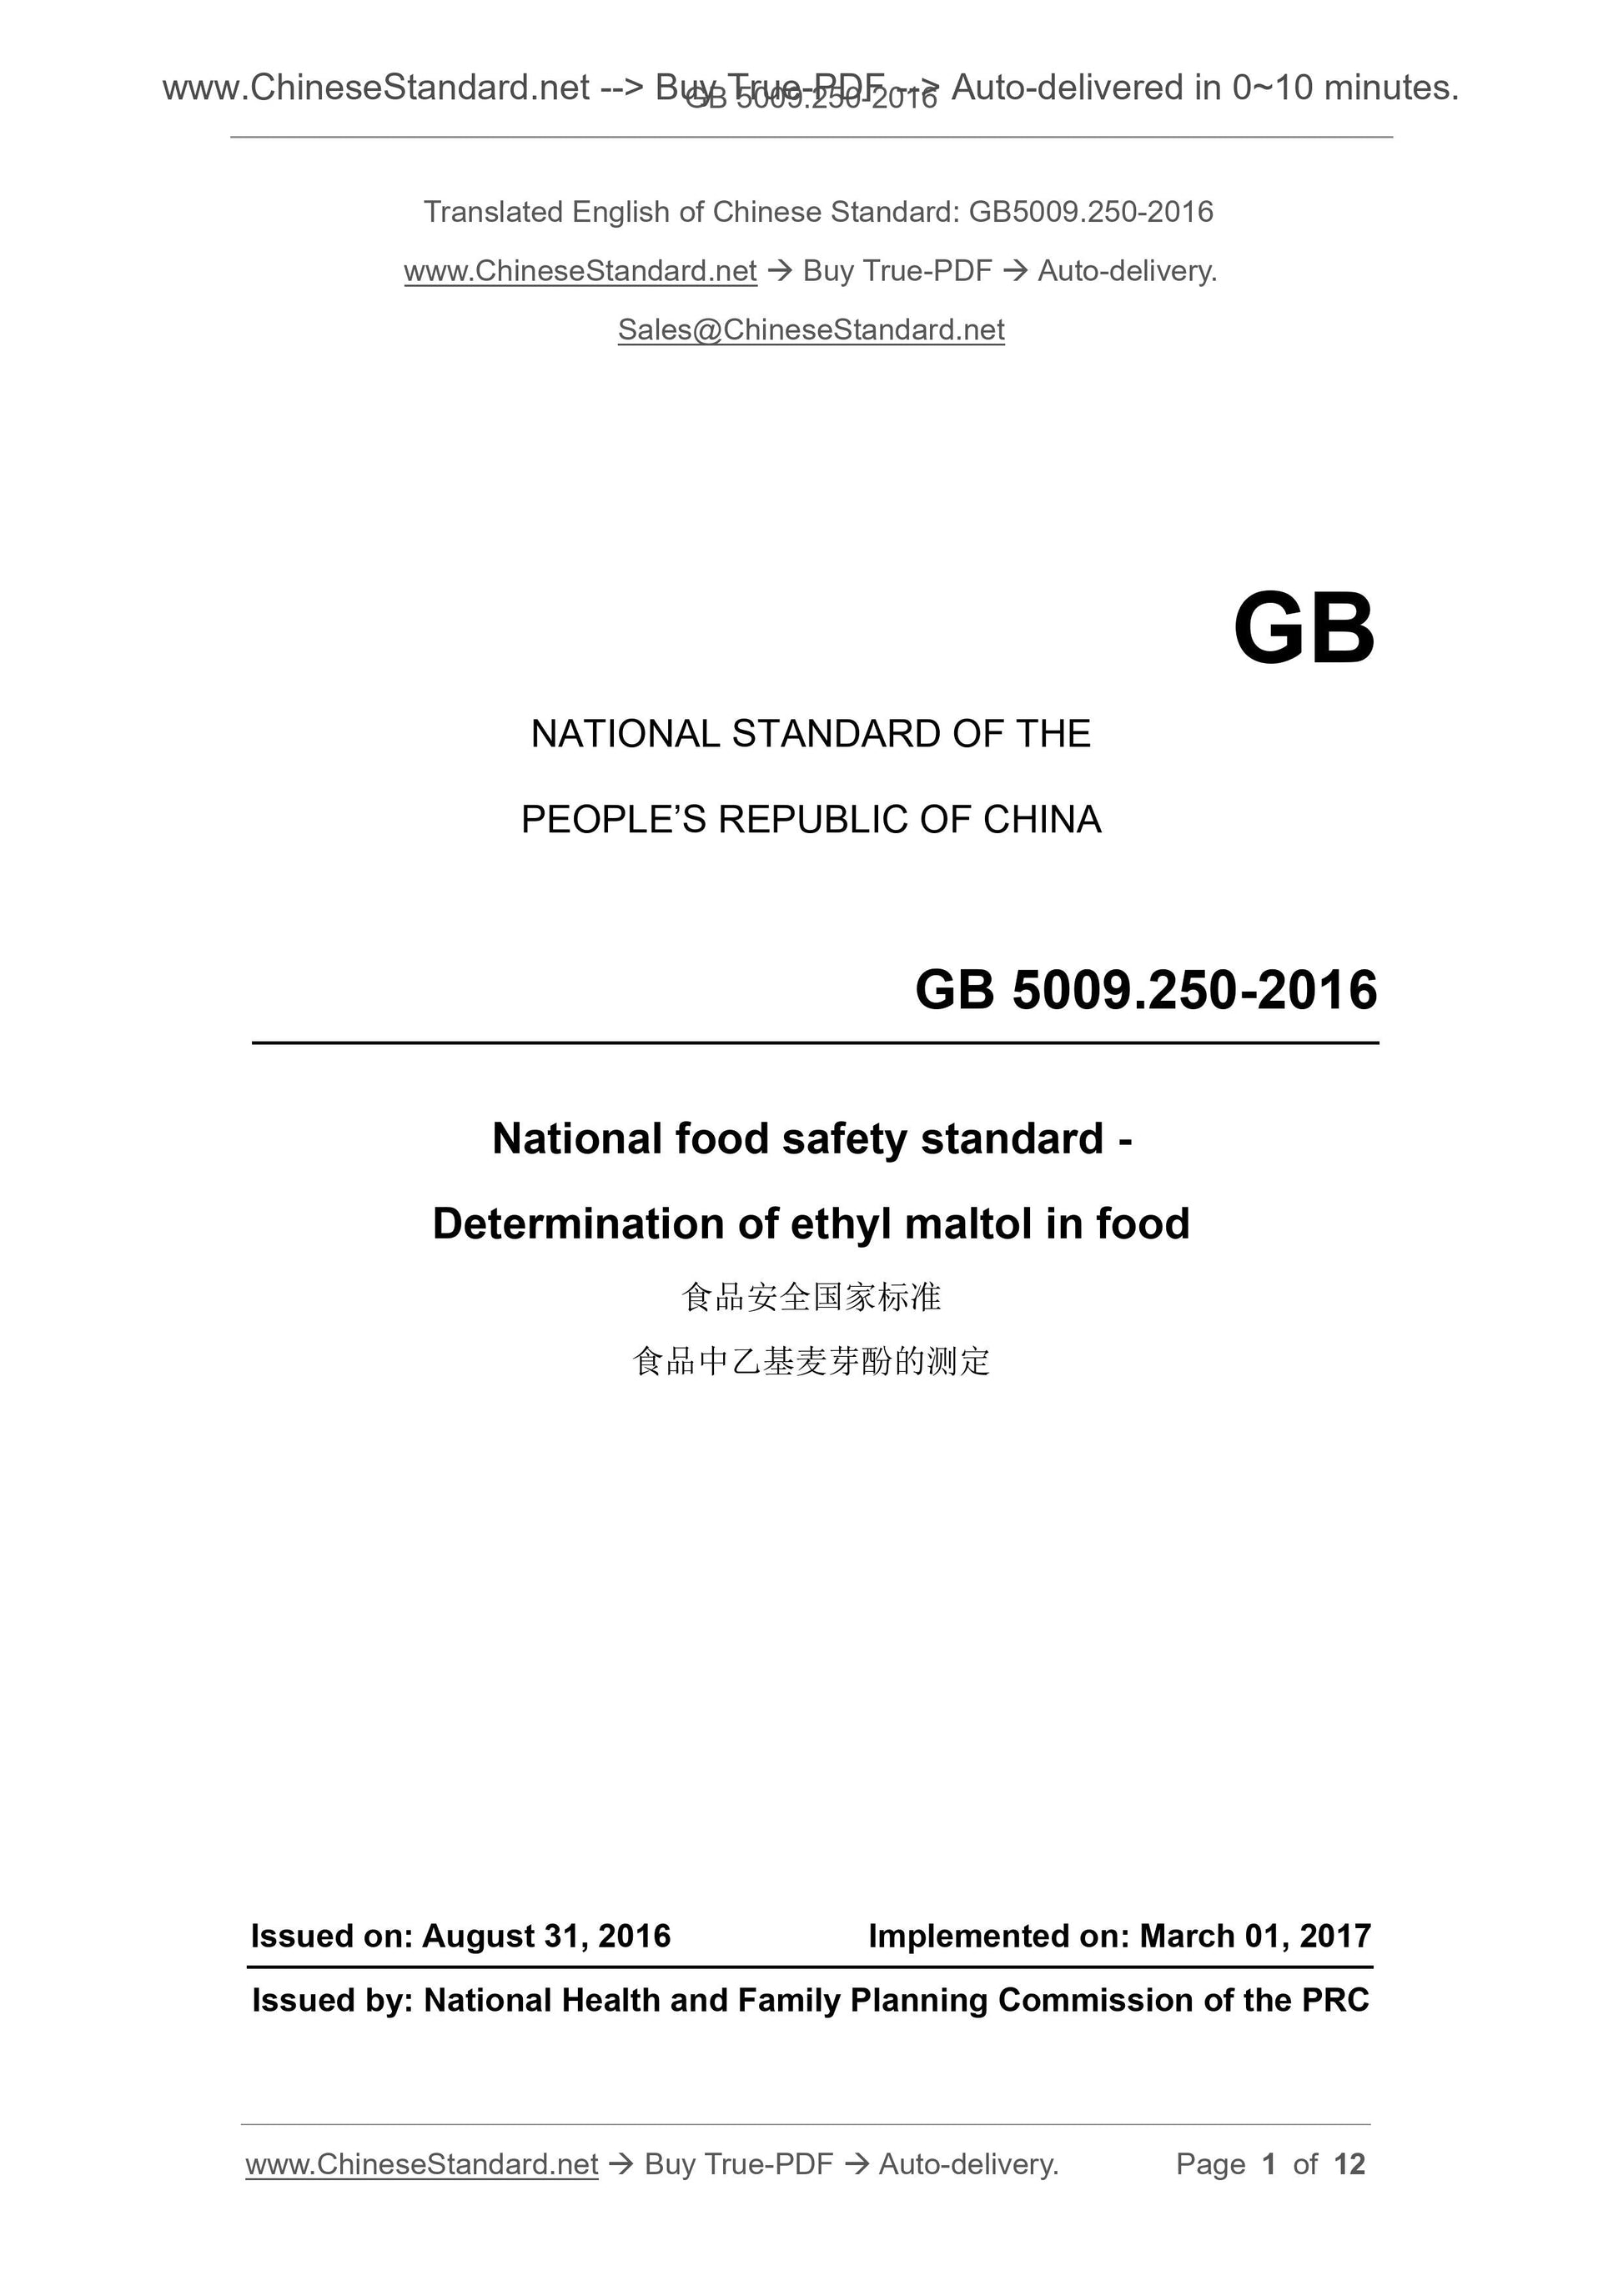 GB 5009.250-2016 Page 1